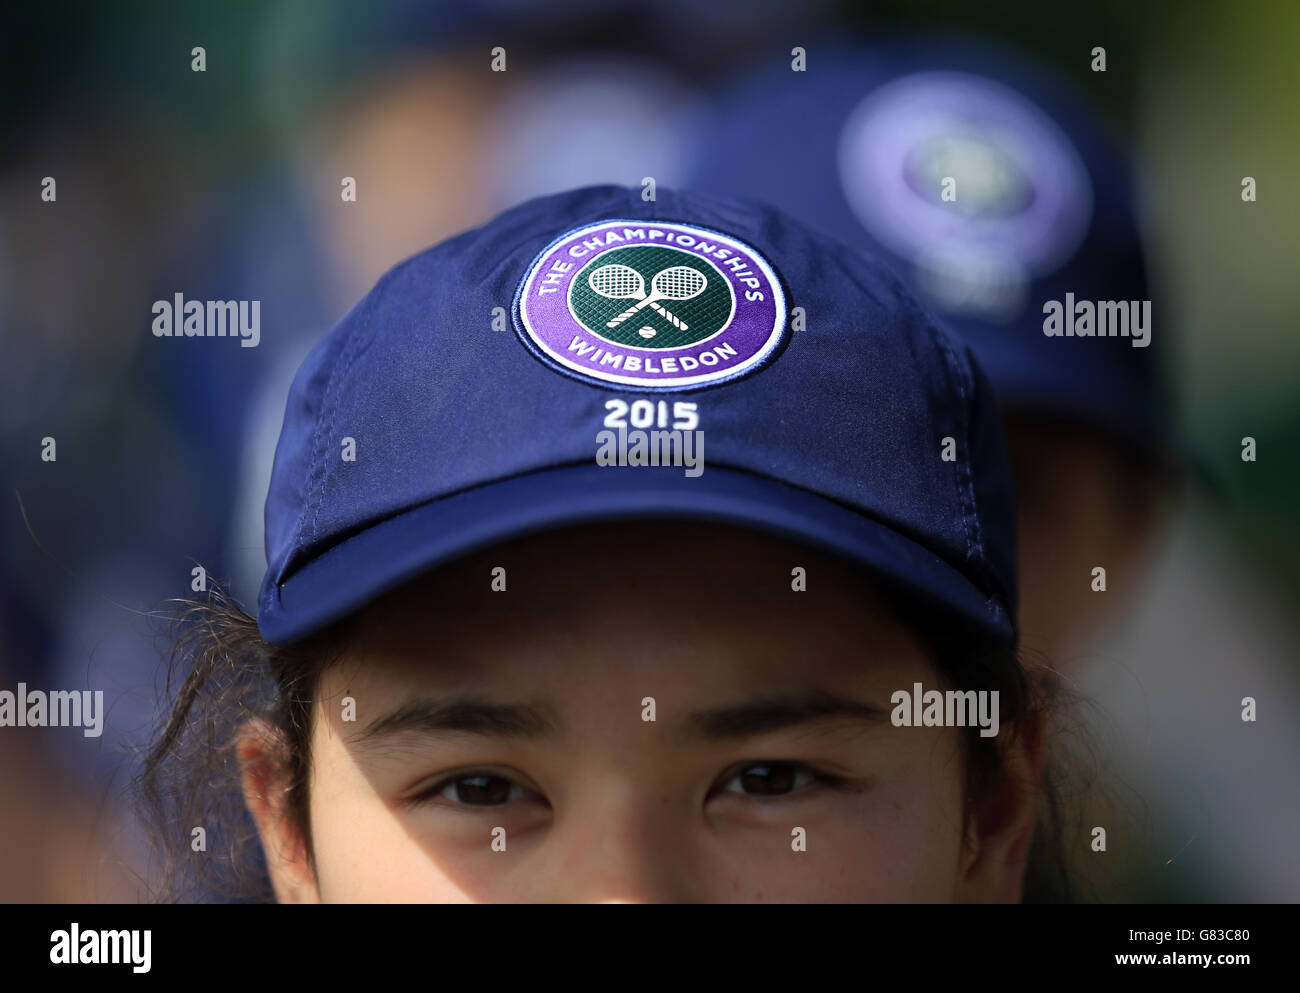 A ball girls sports a Wimbledon baseball cap during day one of the Wimbledon Championships at the All England Lawn Tennis and Croquet Club, Wimbledon. PRESS ASSOCIATION Photo. Picture date: Monday June 29, 2015. See PA Story TENNIS Wimbledon. Photo credit should read Jonathan Brady/PA Wire. Stock Photo